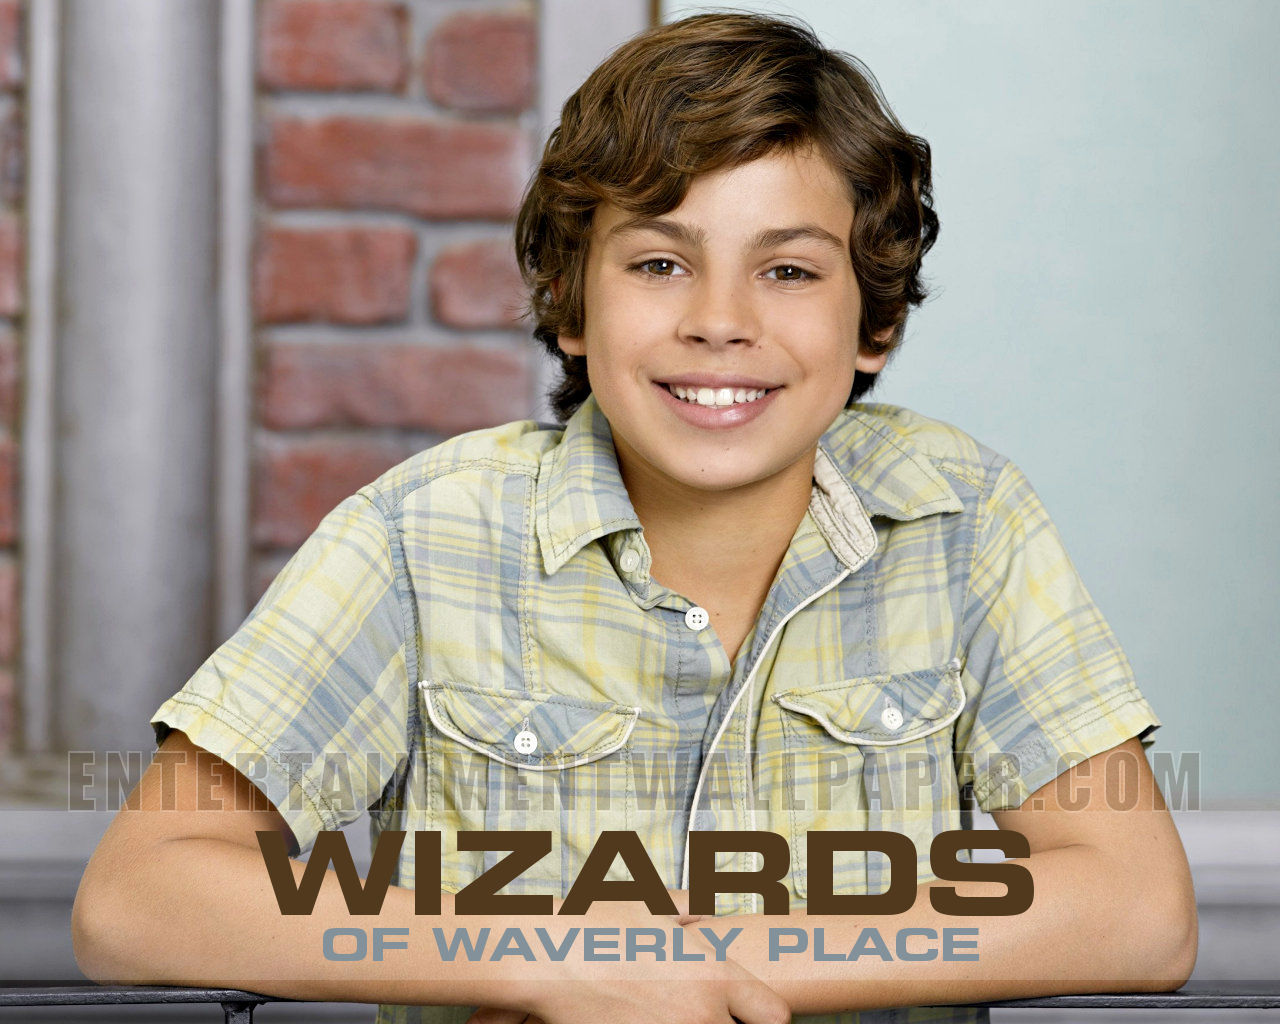 Wizards Of Waverly Place Wallpaper Original Size Now